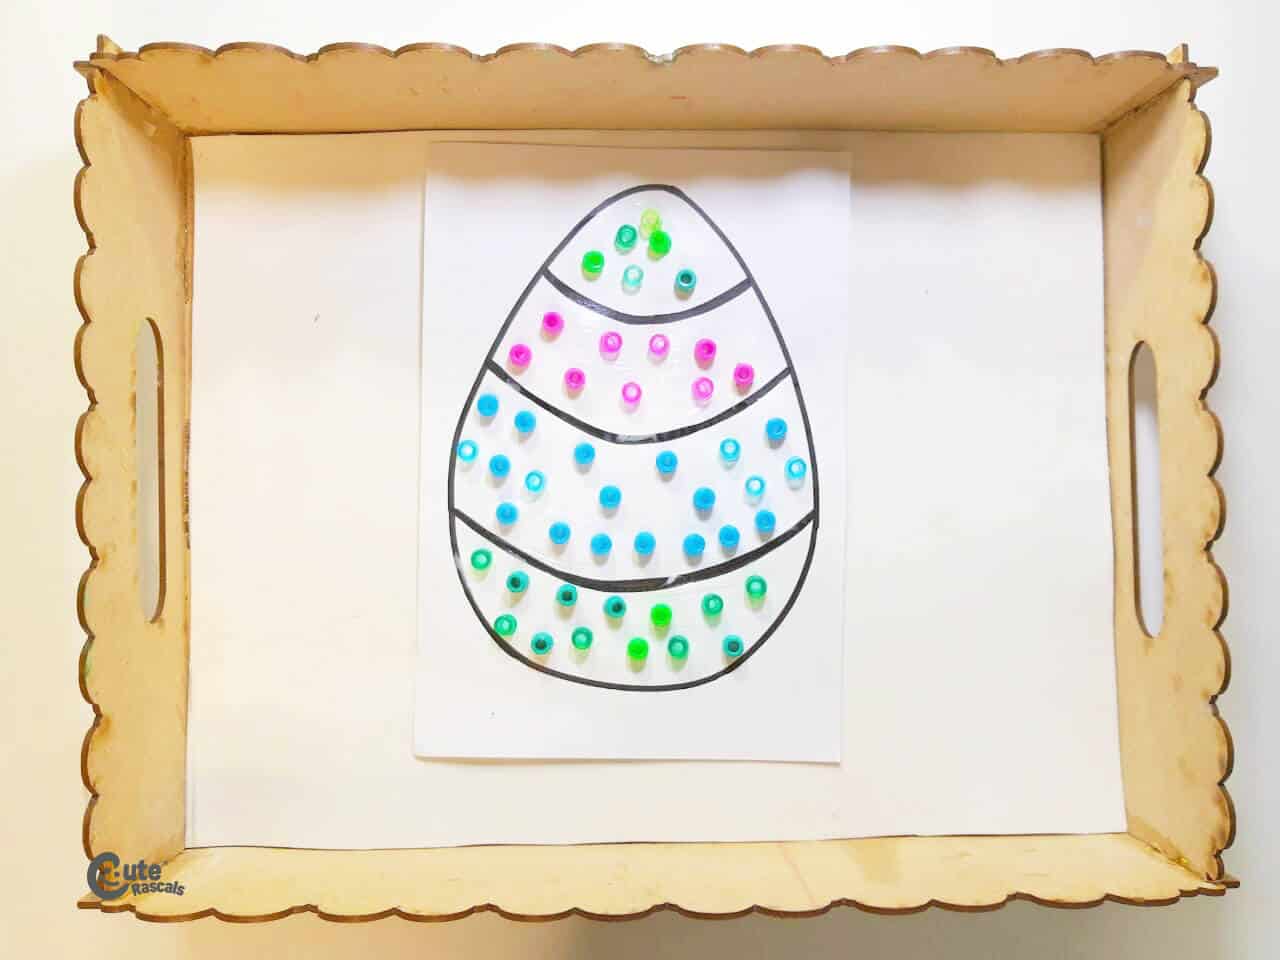 Decorating an Easter egg using motor skills. Fun Easter activity for preschoolers